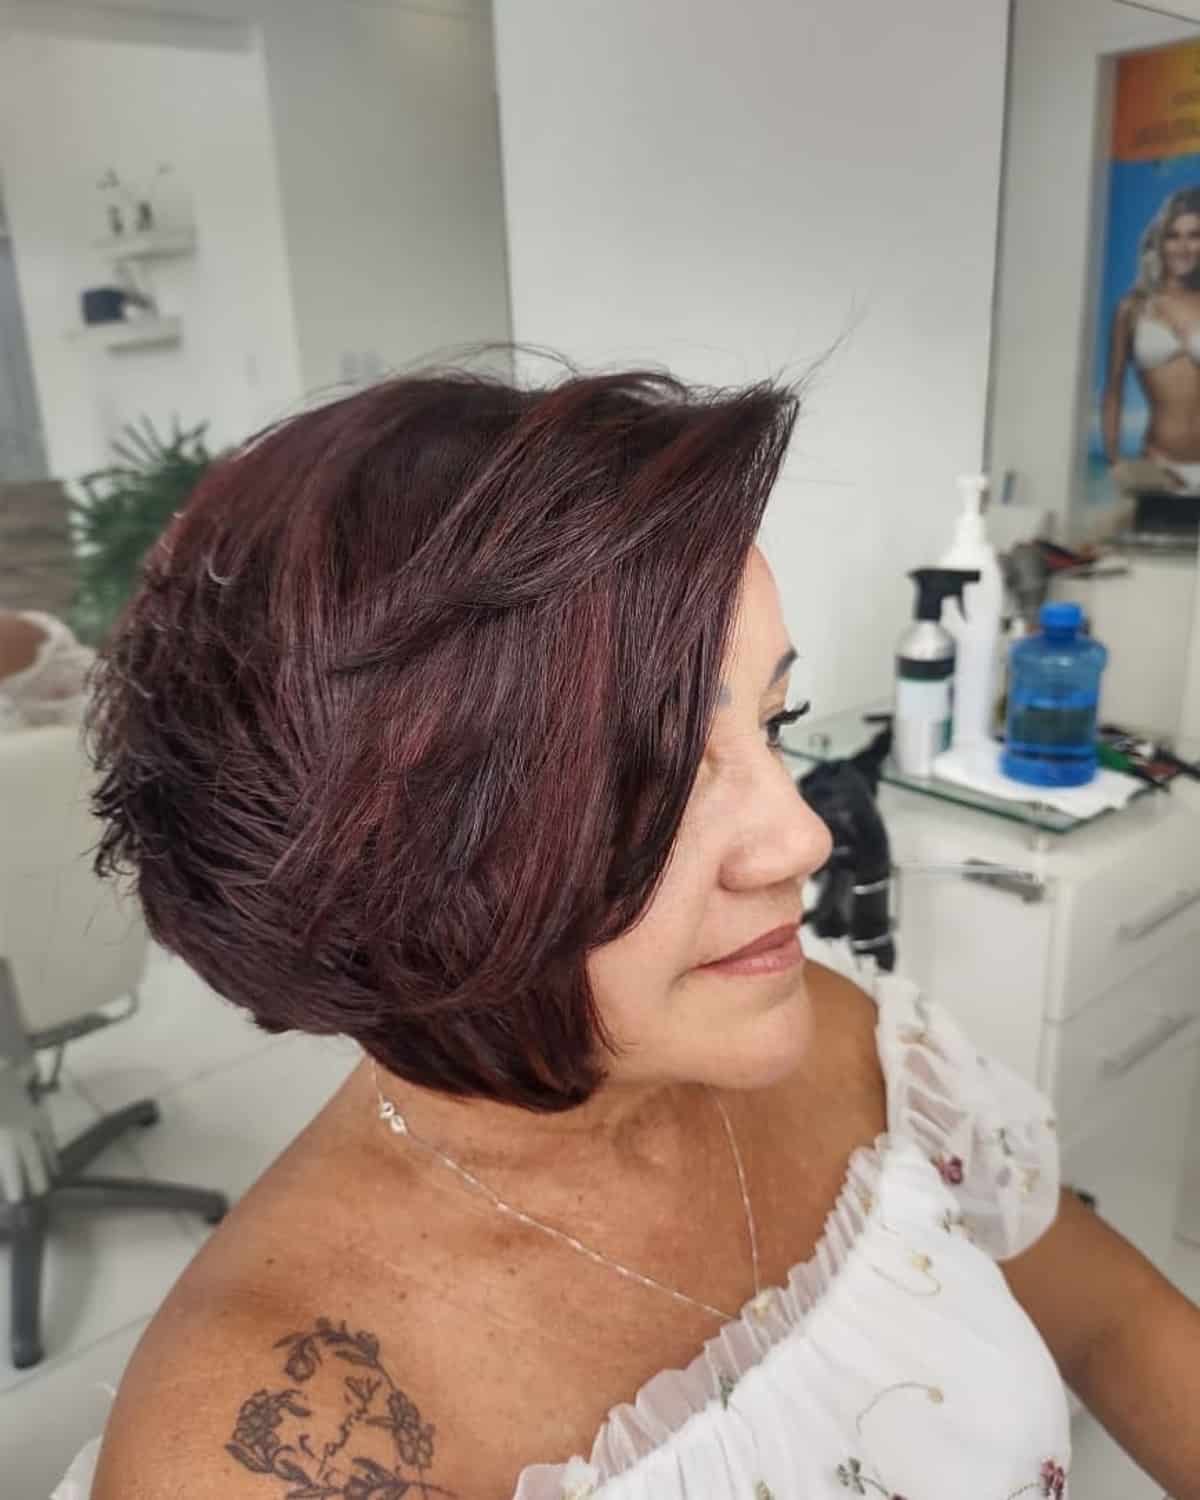 Graduated layered bob for mature women in their 50s